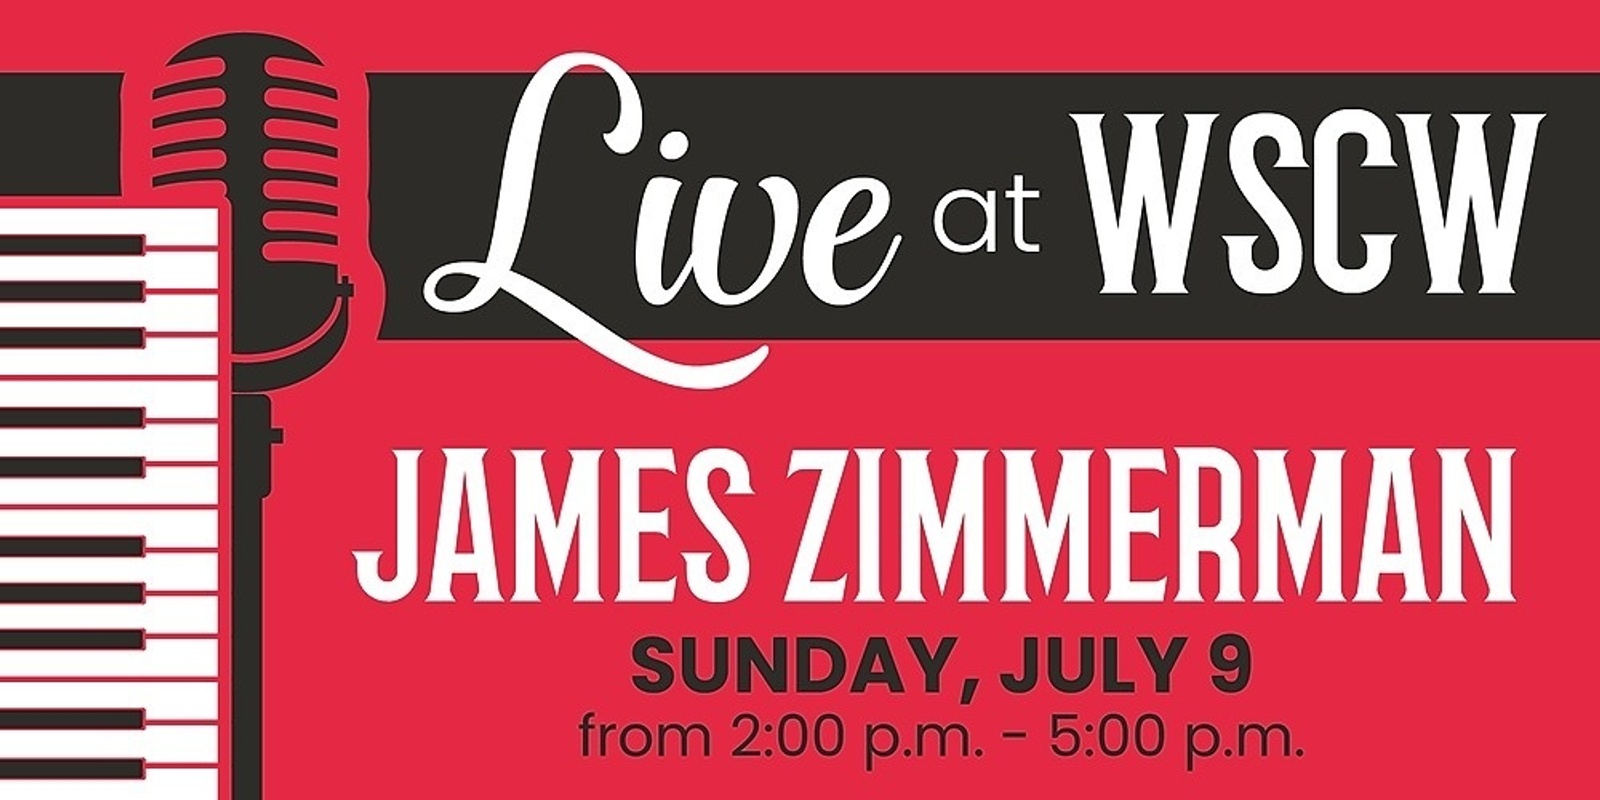 James Zimmerman Live at WSCW July 9